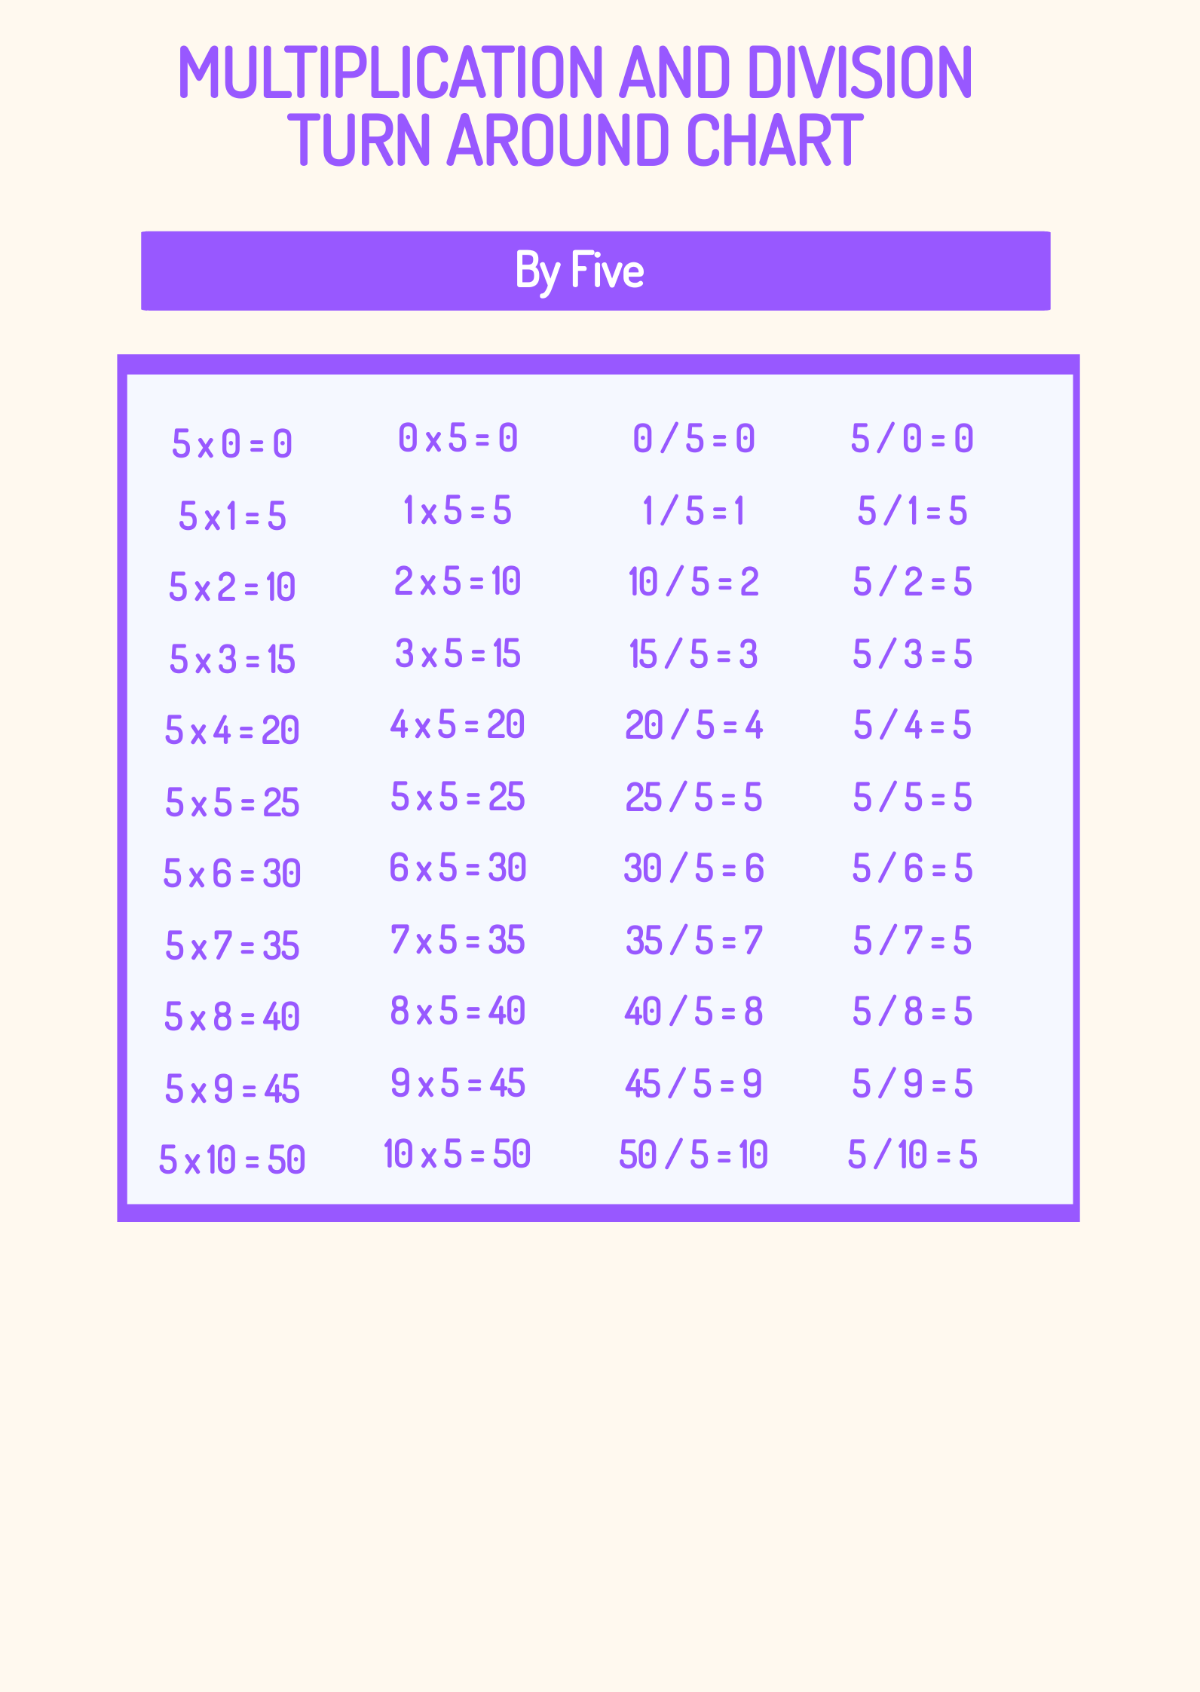 Multiplication And Division Turn Around Chart Template